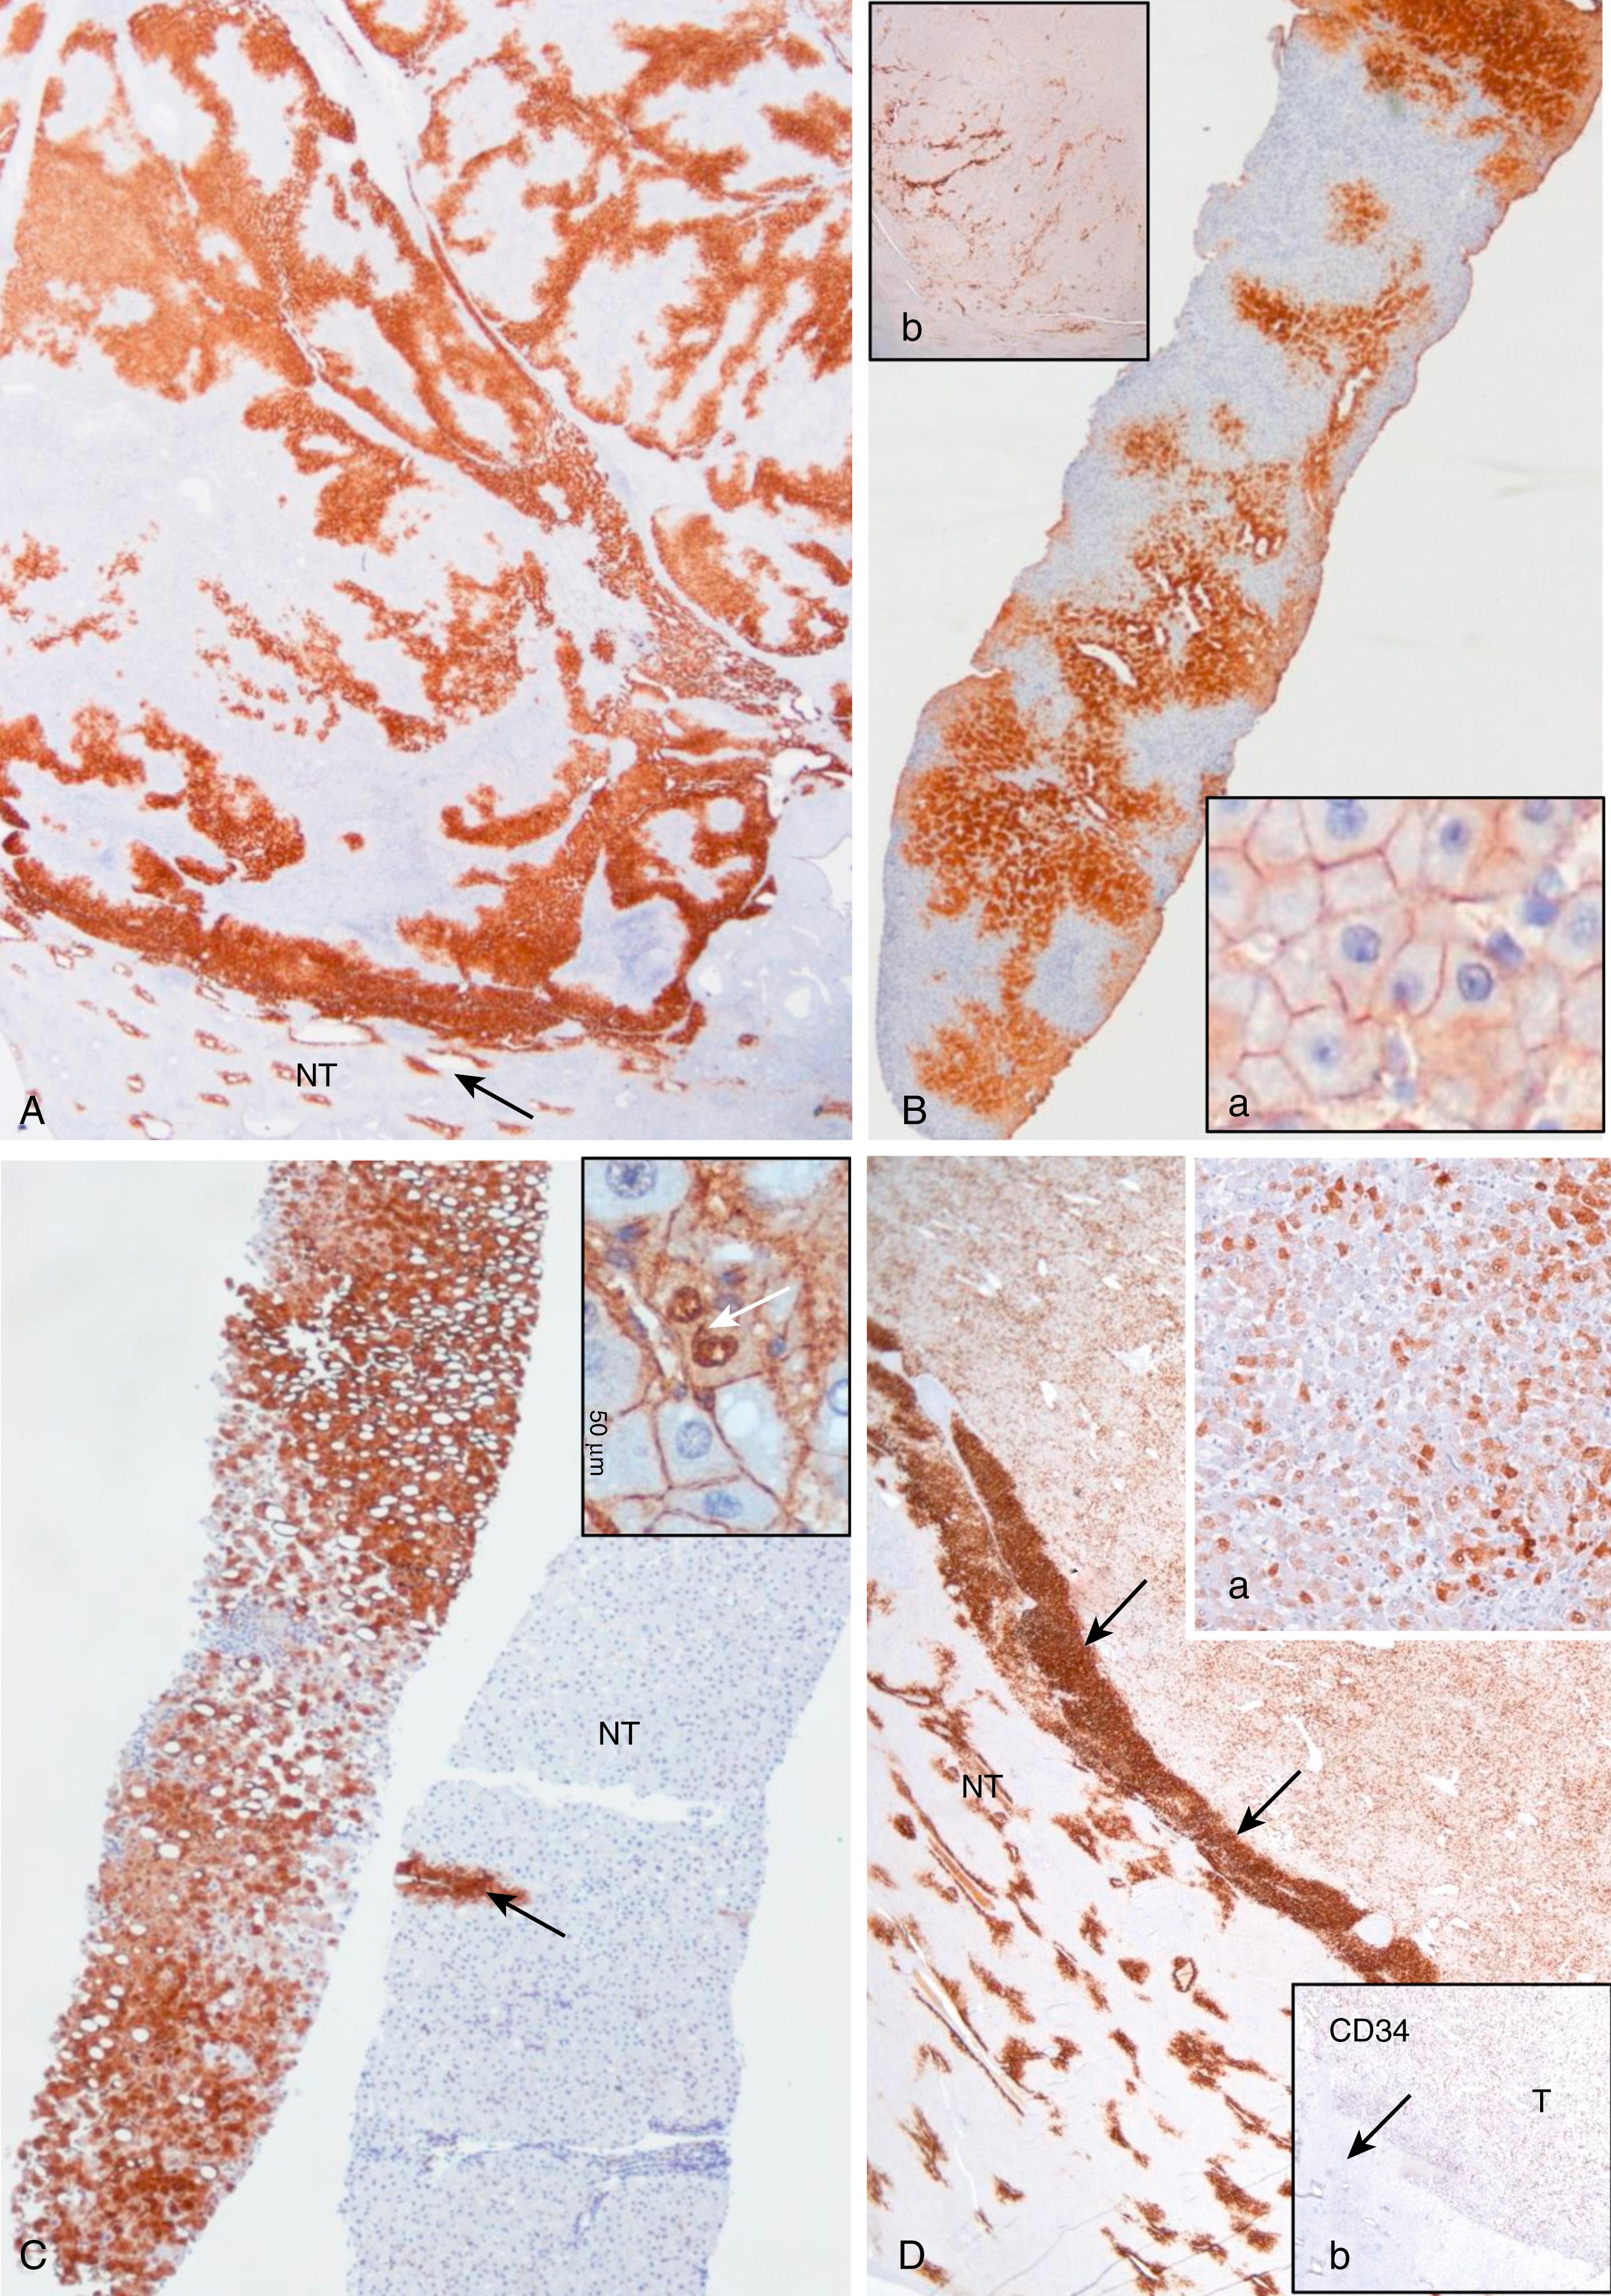 FIGURE 45.1, Characteristic patterns of glutamine synthetase (GS) immunostaining in focal nodular hyperplasia (FNH) (A, B), β-catenin–activated hepatocellular adenoma (HCA) (C, D), and nontumorous liver (A, C, D) . A,B, FNH. Large anastomosing GS-positive areas in a “map-like” pattern in resection specimen (A) and biopsy sample (B), contrasting with nontumorous liver (NT) , where GS expression is restricted to a few rows of perivenular hepatocytes (arrow) . Inset a , Normal membranous expression of β-catenin. Inset b , Little, nonspecific GS immunostaining in an FNH-like nodule occurring in vascular liver disease. C, b-HCA. Strong, diffuse expression of GS in a biopsy sample (C) and aberrant nuclear and cytoplasmic β-catenin staining (inset, arrow) , characteristic of a high level of β-catenin pathway activation (deletions or mutations in exon 3 non S45). D, Heterogenous expression of GS in a resection specimen, “starry-sky” pattern (inset a) , associated with a strong positive rim (arrows) adjacent to the nontumorous liver (NT) . Inset b , CD34 is diffusely expressed in endothelial cells of the tumor (T) except at the rim, where GS is strongly expressed (arrow) . These patterns are characteristic of b-HCA with exon 3 S45 mutation.